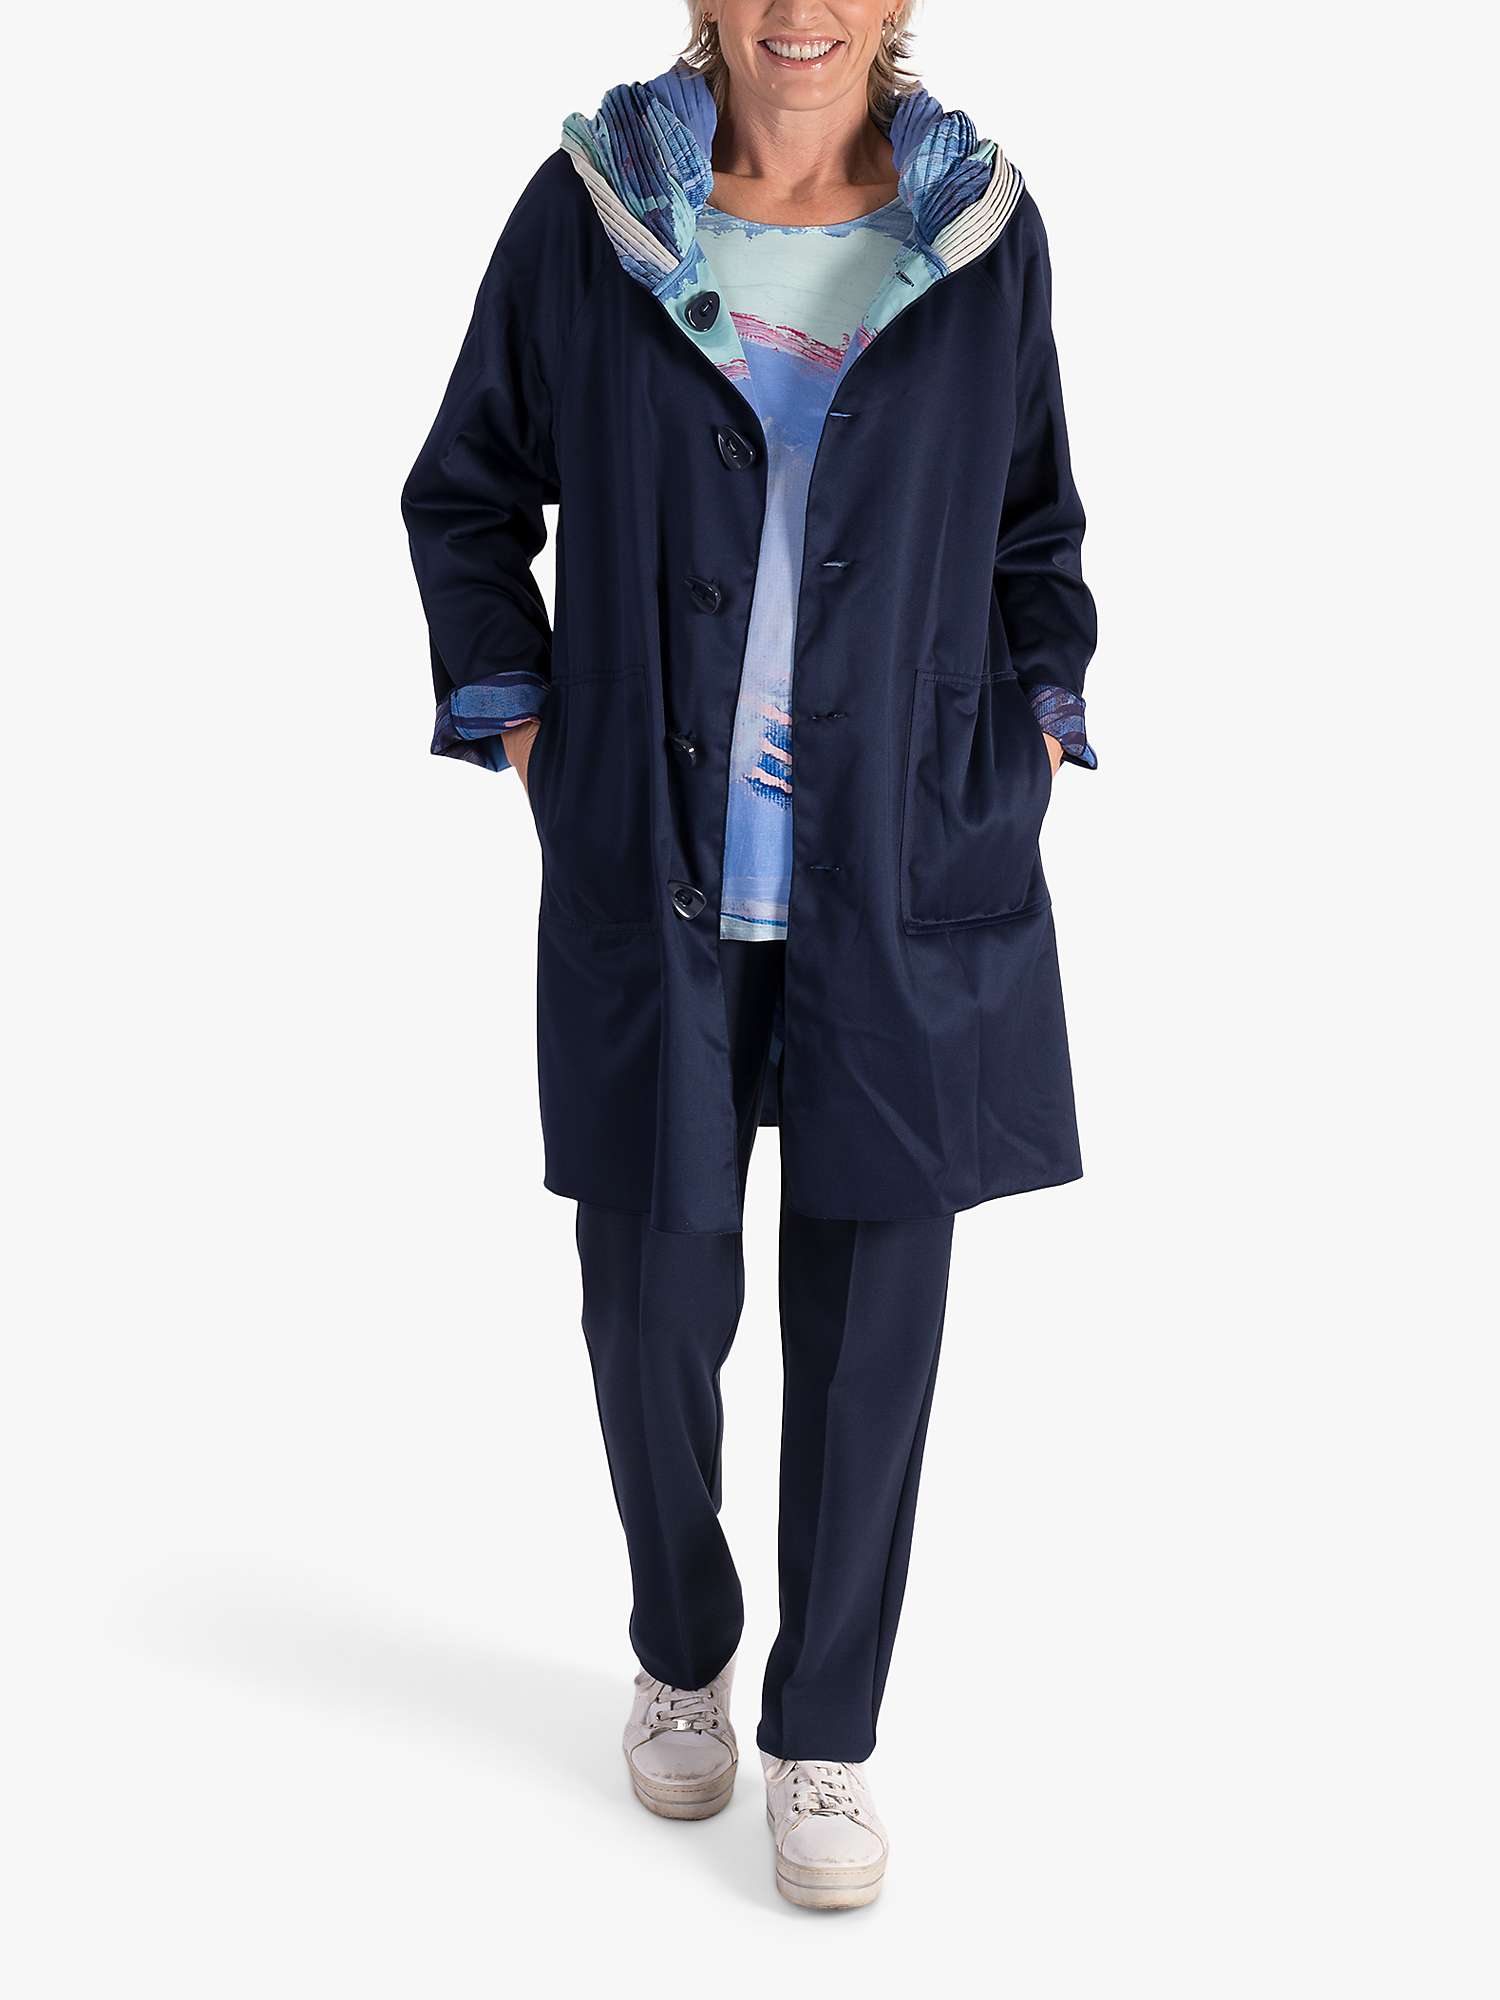 Buy chesca Abstract Butterfly Print Reversible Raincoat, Blue/Multi Online at johnlewis.com